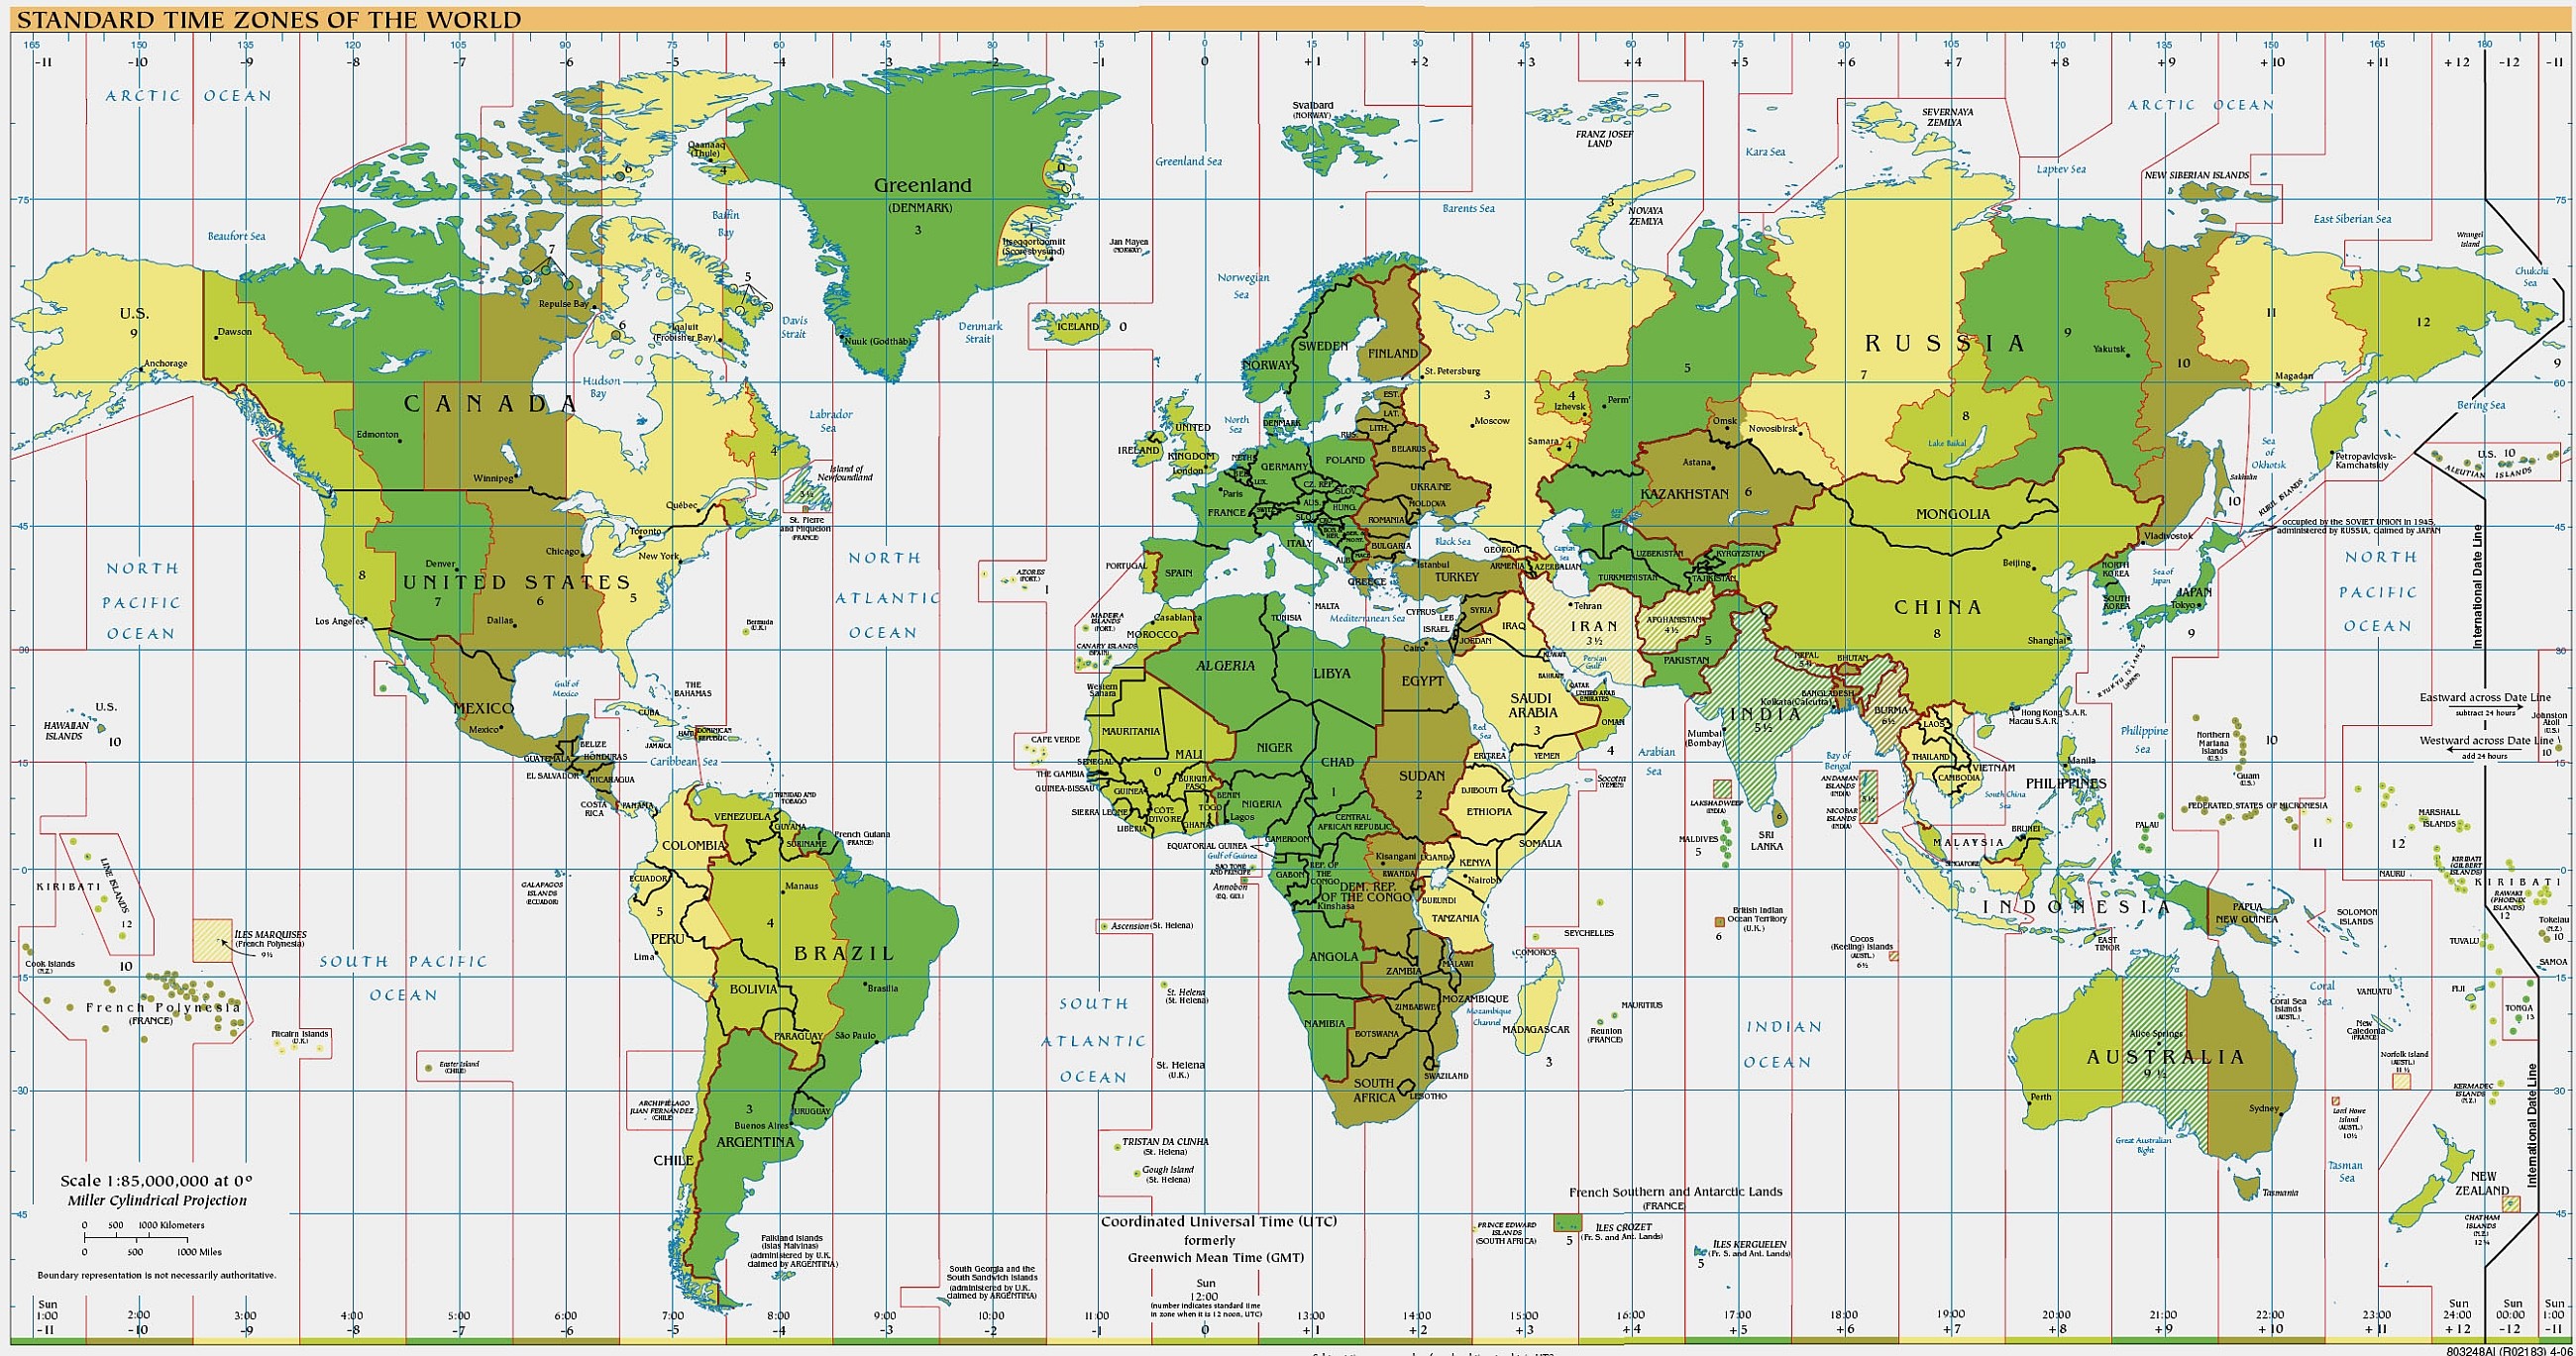 2600x1369 World Clock Map Index Of Time Zones And Abbreviations Timezone Com 6